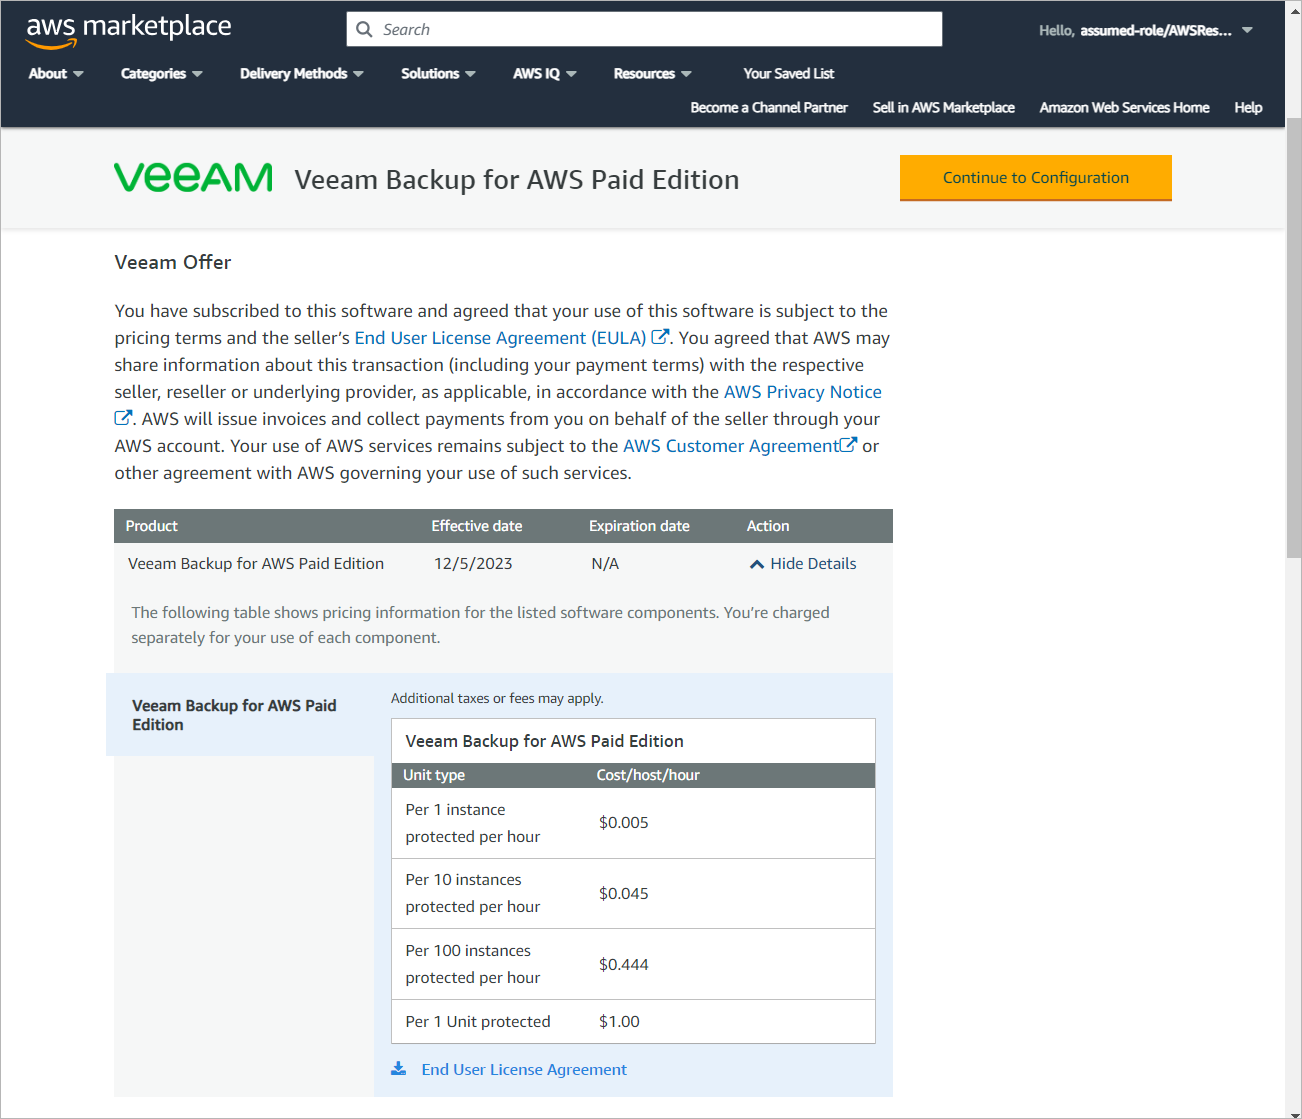 Installing Veeam Backup for AWS from AWS Marketplace